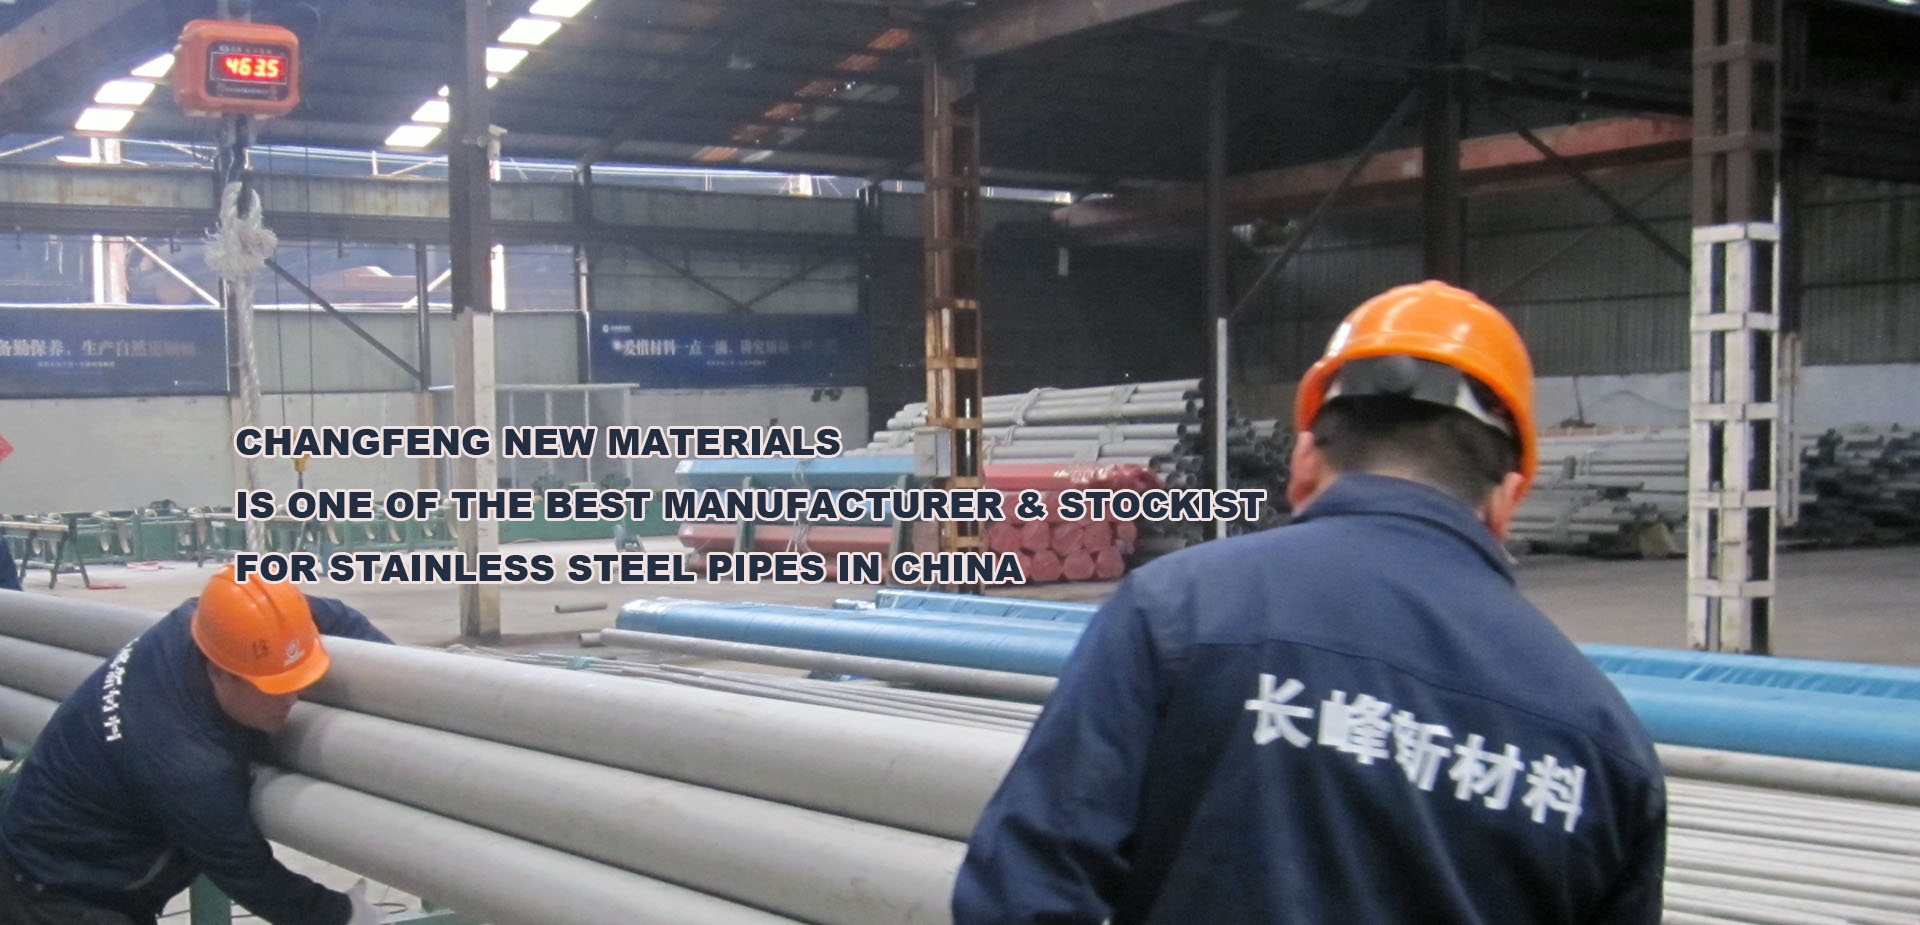 one the best stockist for stainless steel pipes